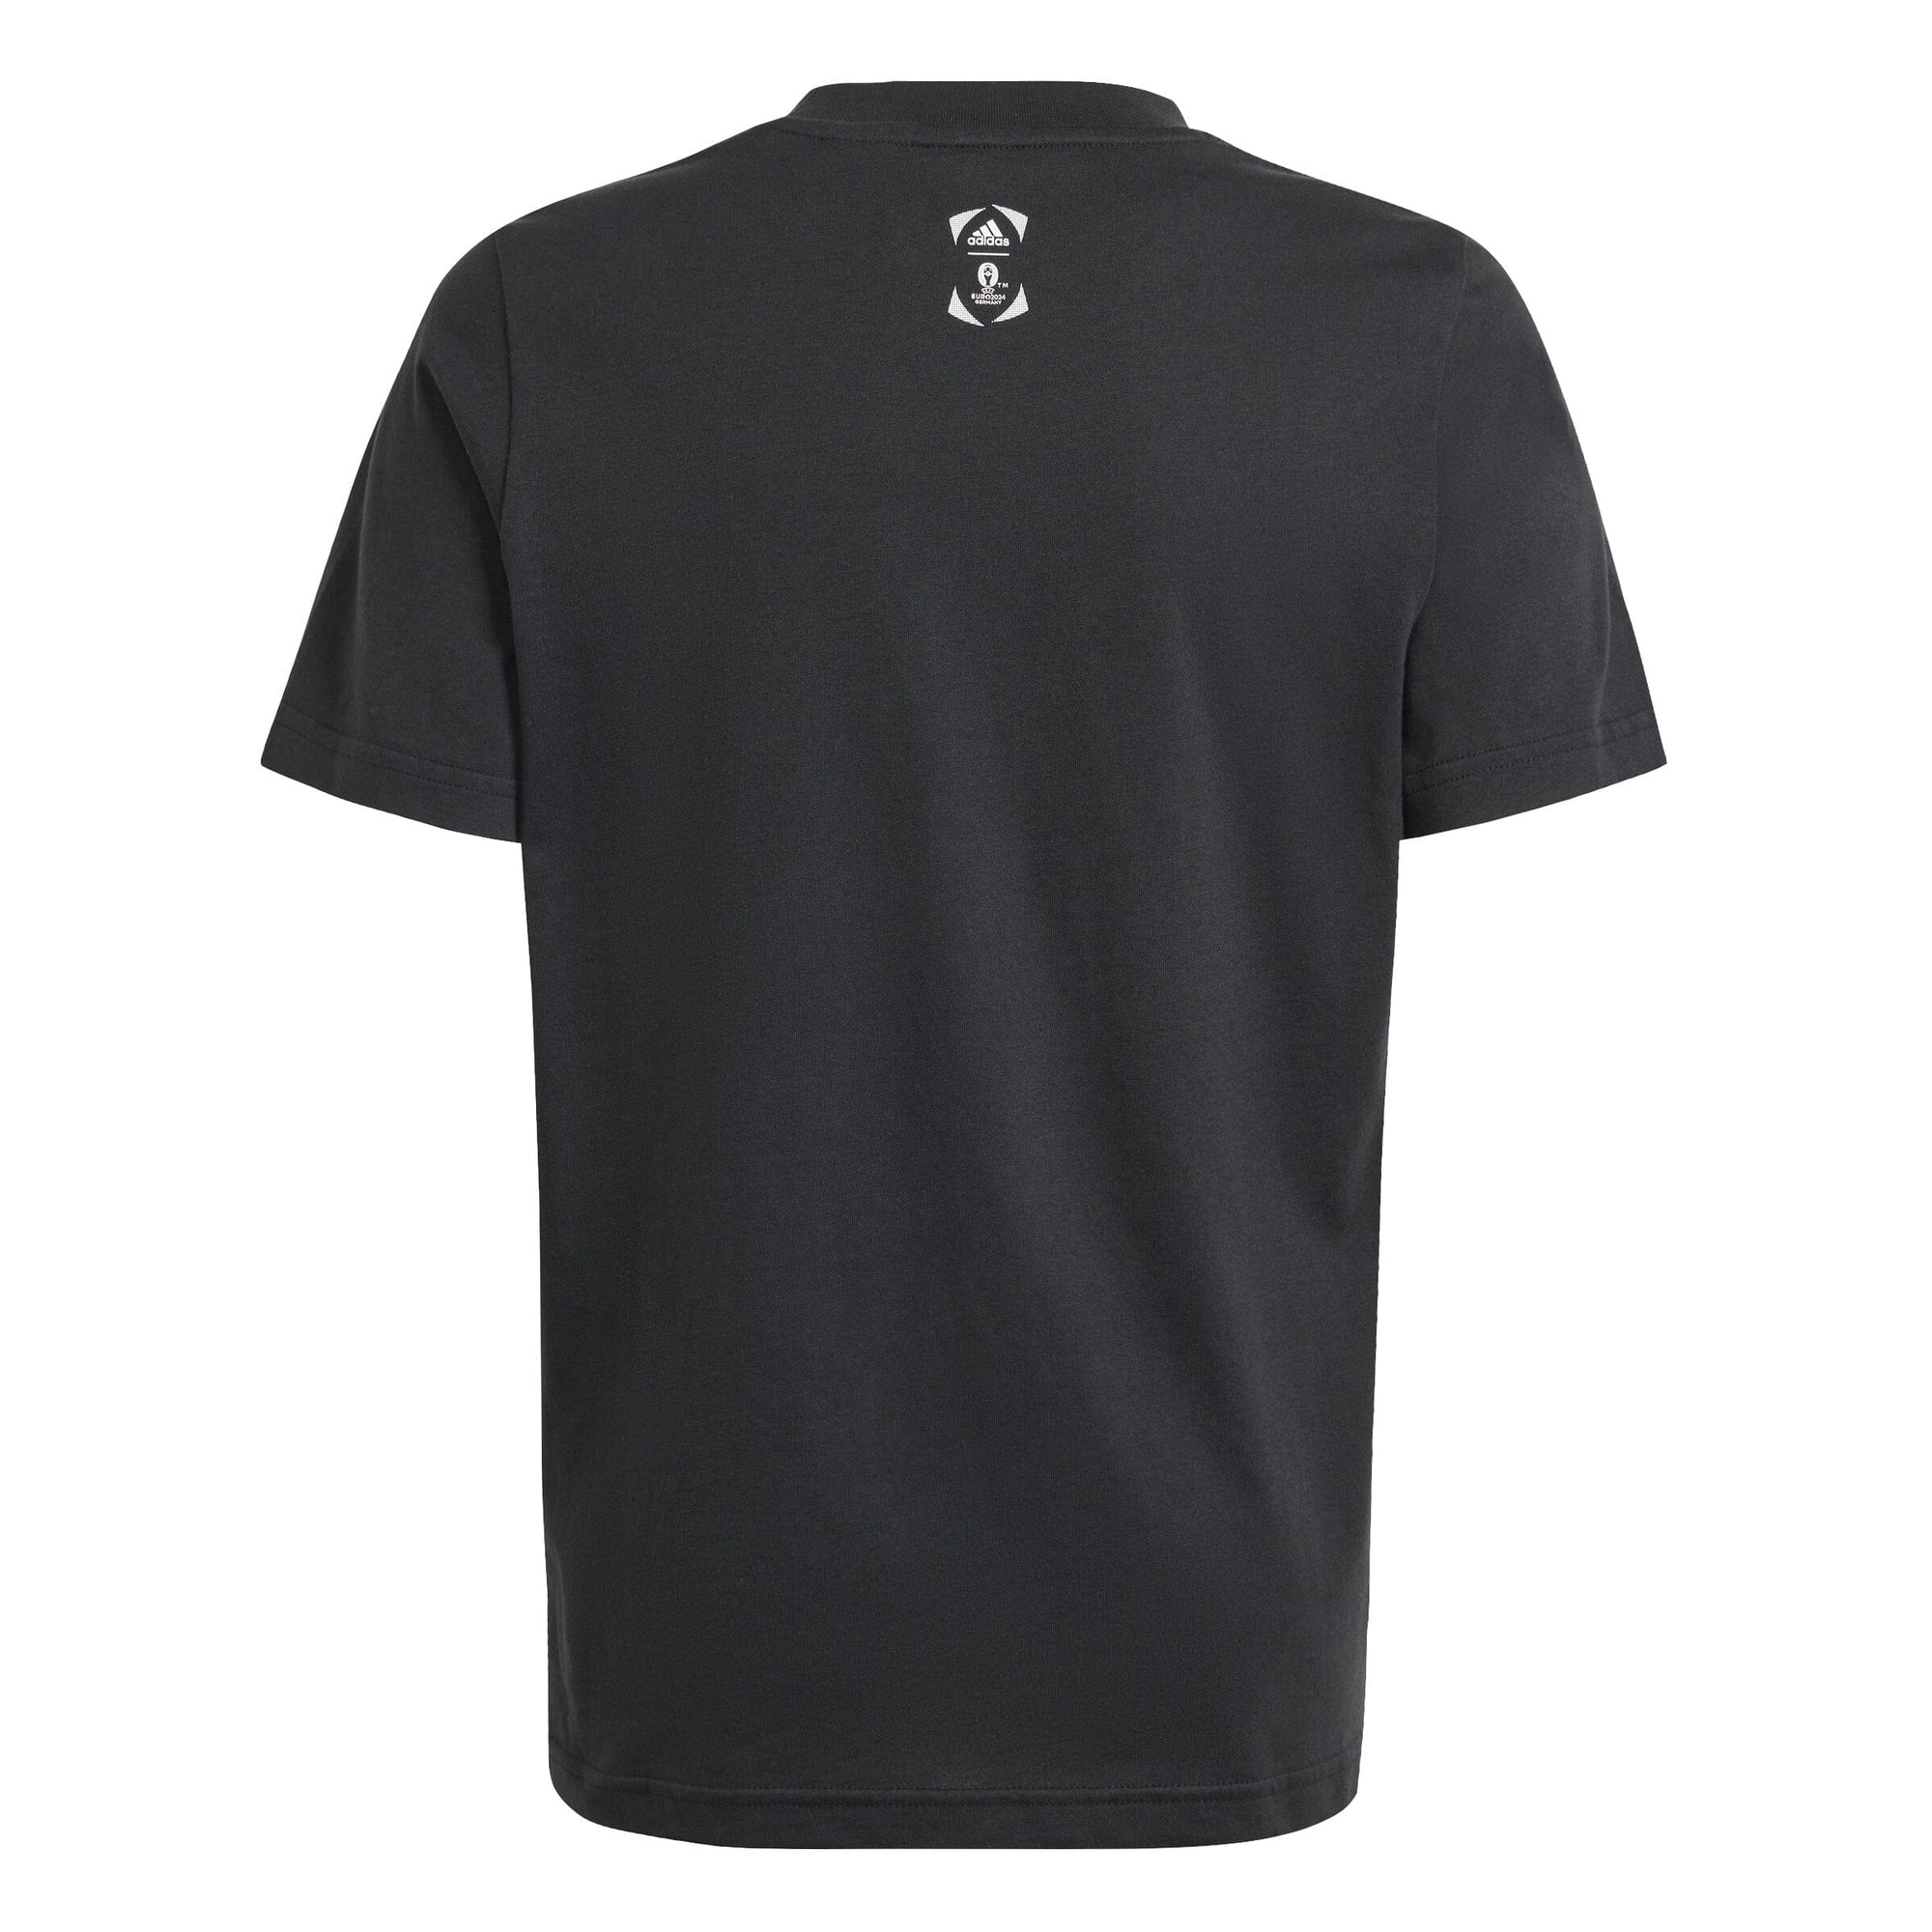 adidas Youth Official Emblem Tee | IT9307 Adidas 